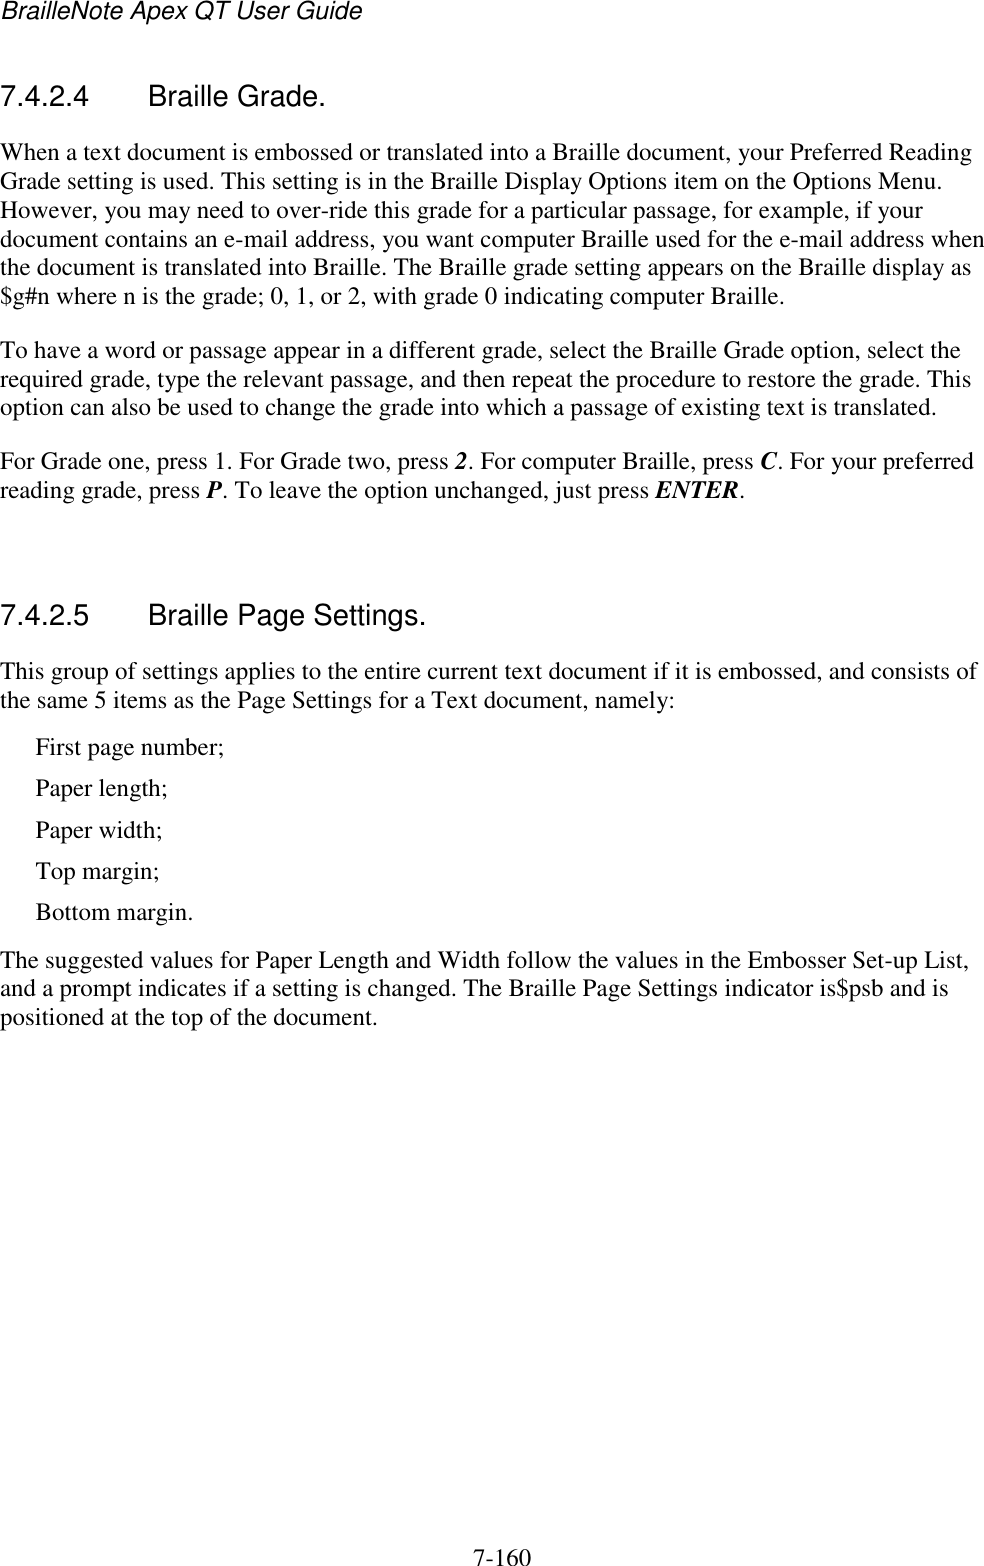 BrailleNote Apex QT User Guide  7-160   7.4.2.4  Braille Grade. When a text document is embossed or translated into a Braille document, your Preferred Reading Grade setting is used. This setting is in the Braille Display Options item on the Options Menu. However, you may need to over-ride this grade for a particular passage, for example, if your document contains an e-mail address, you want computer Braille used for the e-mail address when the document is translated into Braille. The Braille grade setting appears on the Braille display as $g#n where n is the grade; 0, 1, or 2, with grade 0 indicating computer Braille. To have a word or passage appear in a different grade, select the Braille Grade option, select the required grade, type the relevant passage, and then repeat the procedure to restore the grade. This option can also be used to change the grade into which a passage of existing text is translated. For Grade one, press 1. For Grade two, press 2. For computer Braille, press C. For your preferred reading grade, press P. To leave the option unchanged, just press ENTER.   7.4.2.5  Braille Page Settings. This group of settings applies to the entire current text document if it is embossed, and consists of the same 5 items as the Page Settings for a Text document, namely: First page number; Paper length; Paper width; Top margin; Bottom margin. The suggested values for Paper Length and Width follow the values in the Embosser Set-up List, and a prompt indicates if a setting is changed. The Braille Page Settings indicator is$psb and is positioned at the top of the document.   